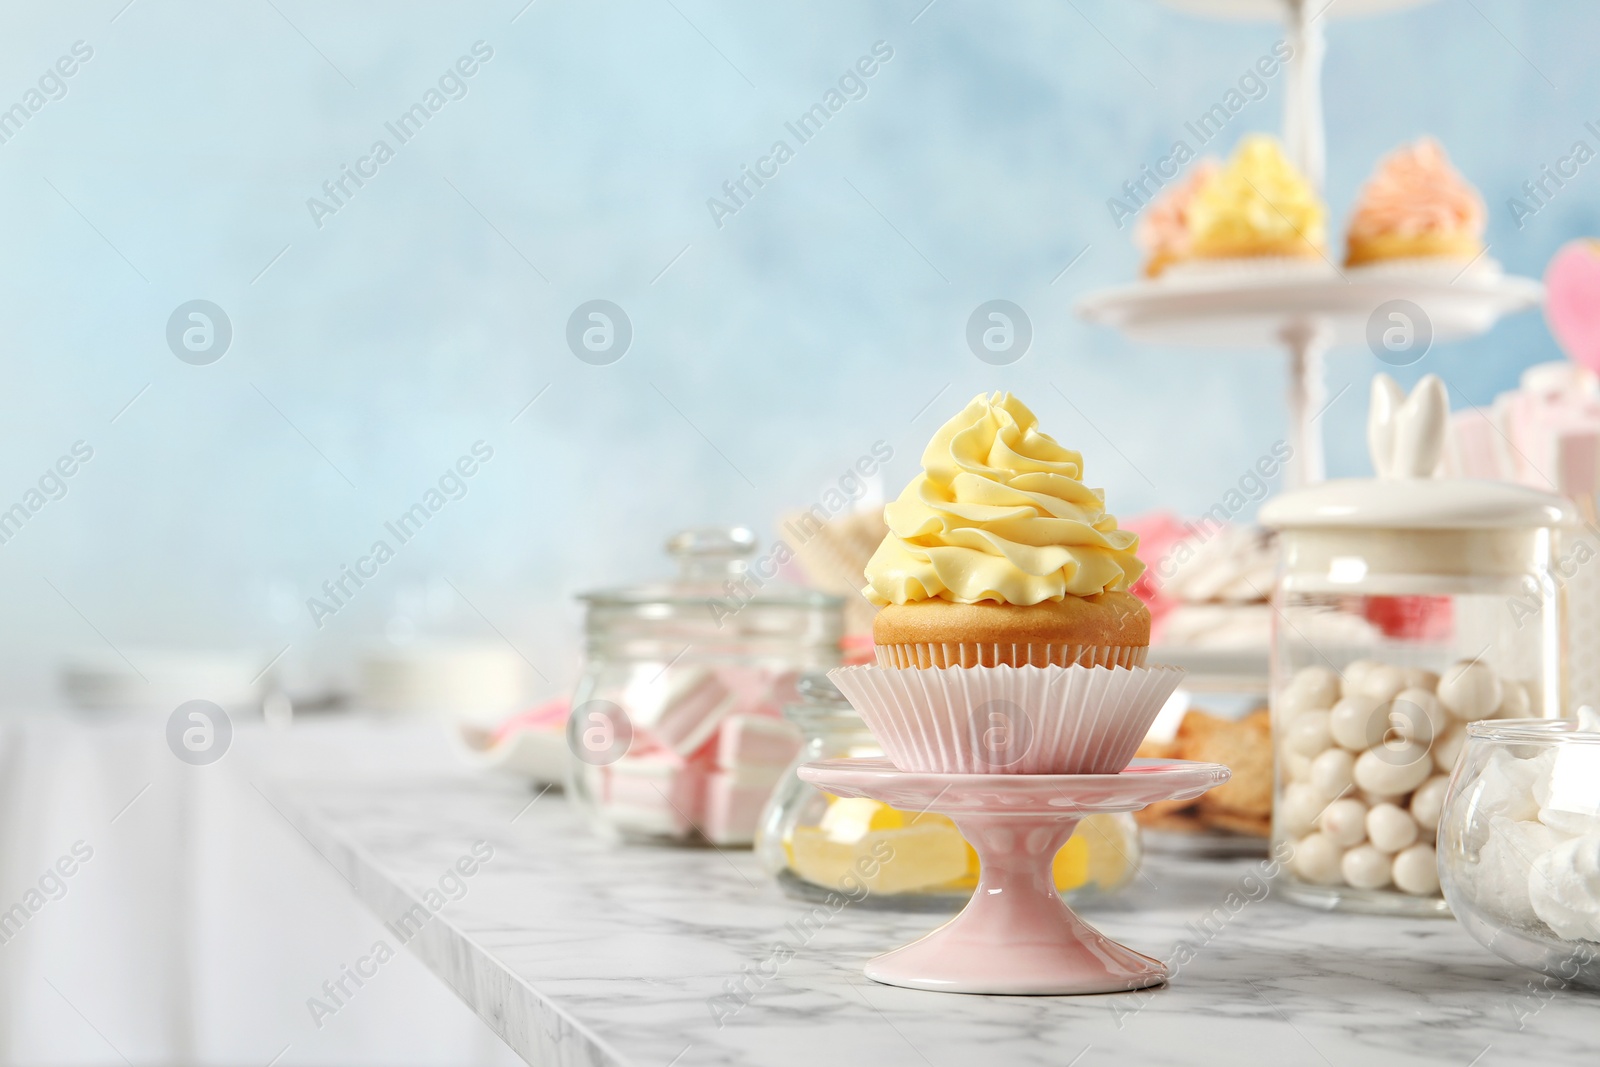 Photo of Stand with cupcake and other sweets on white marble table, space for text. Candy bar